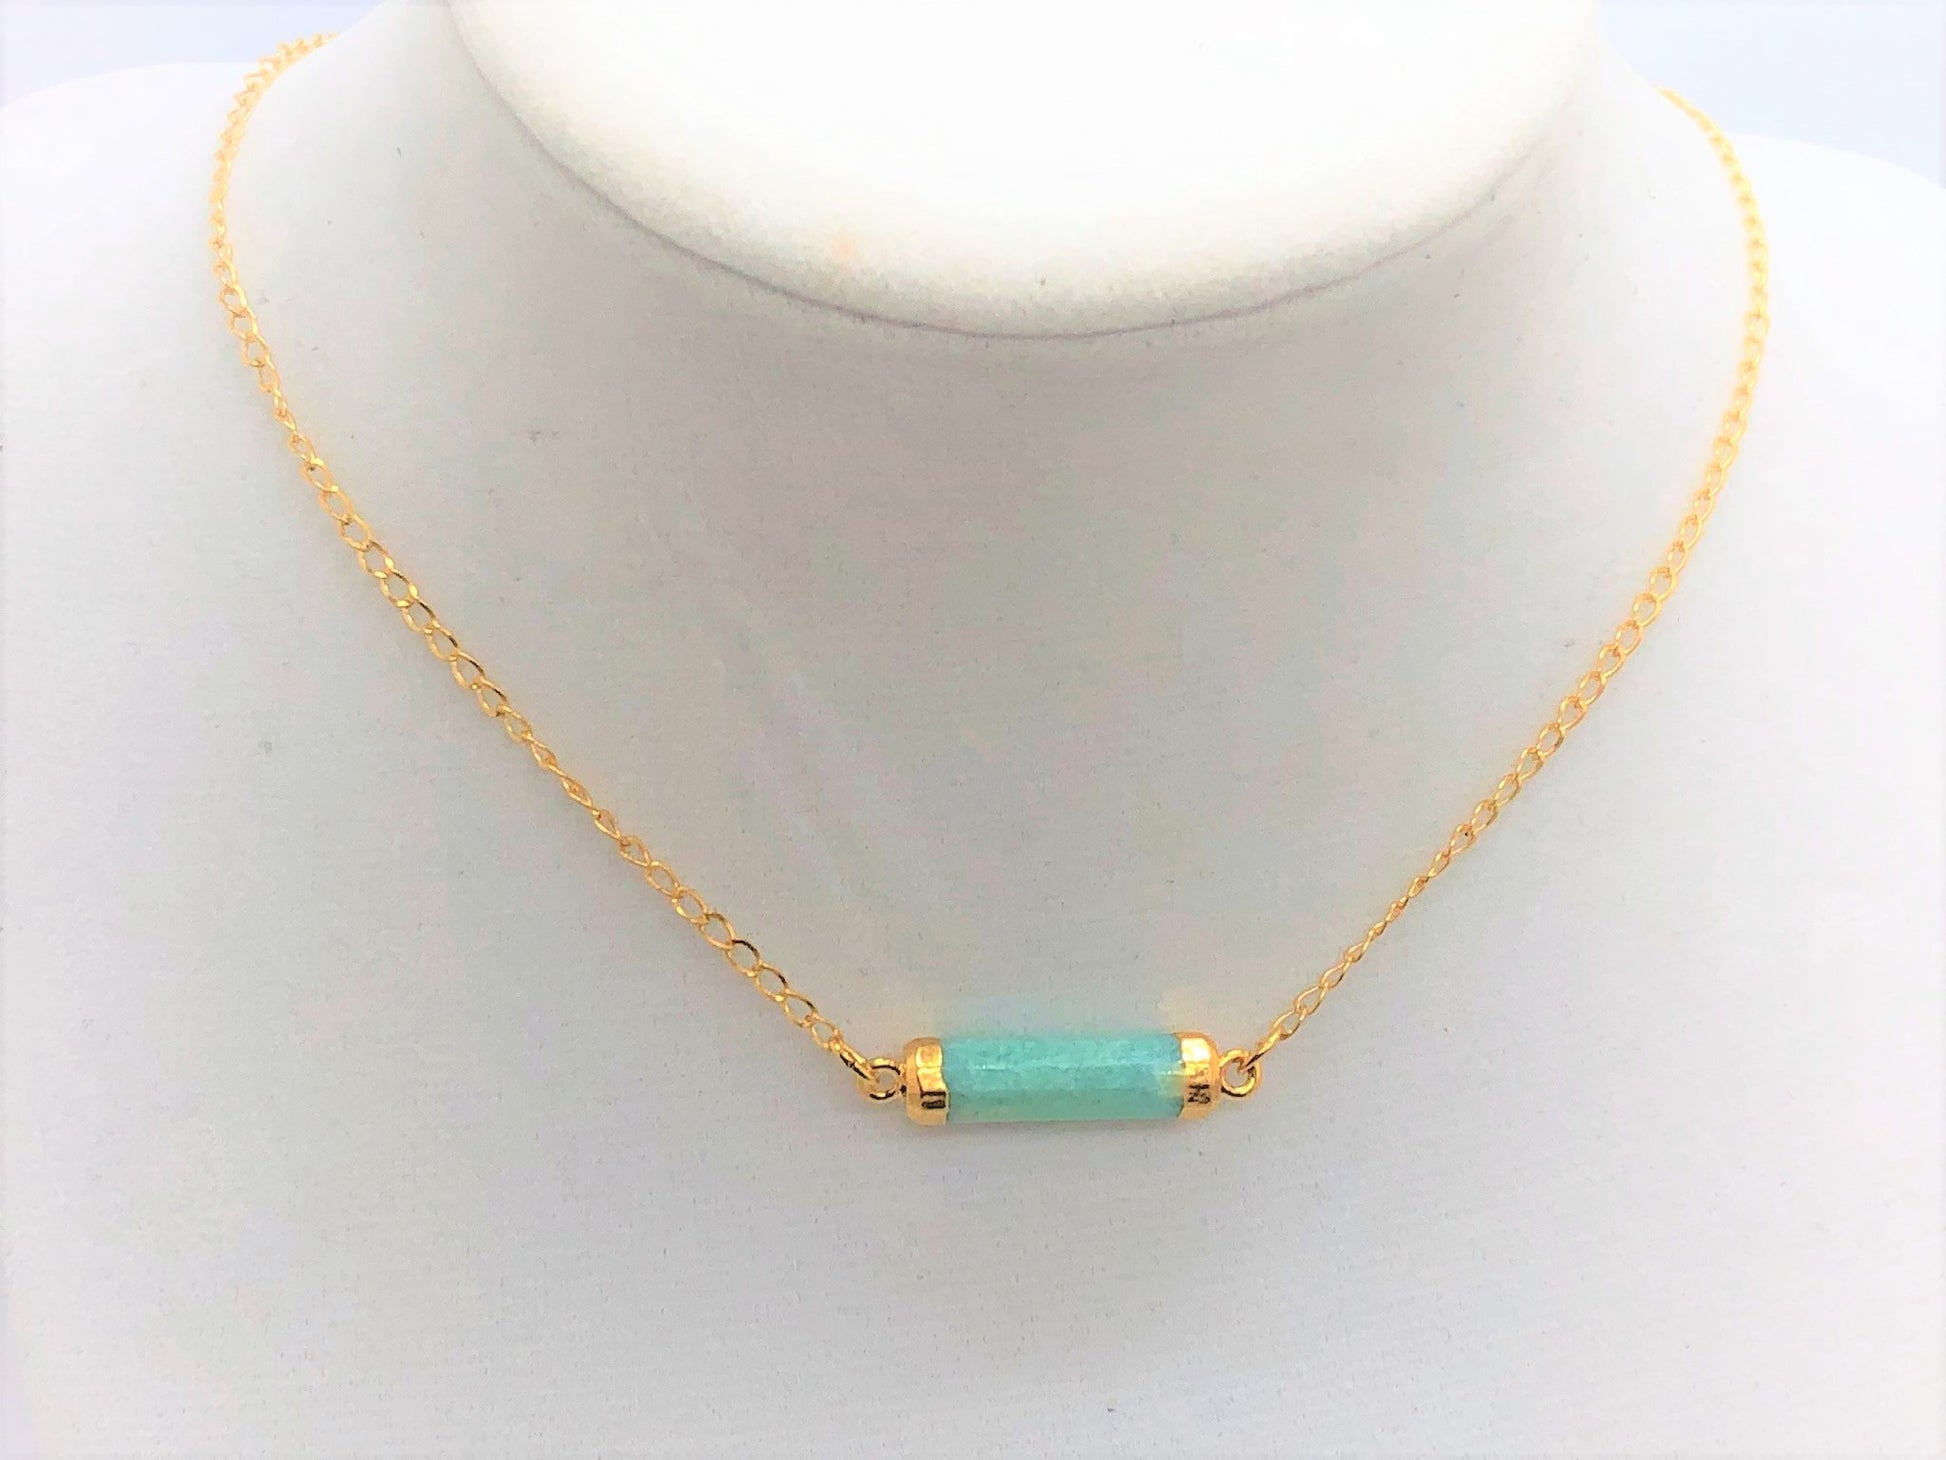 Short Gemstone Tube Necklaces - Emmis Jewelry, Necklace, [product_color]